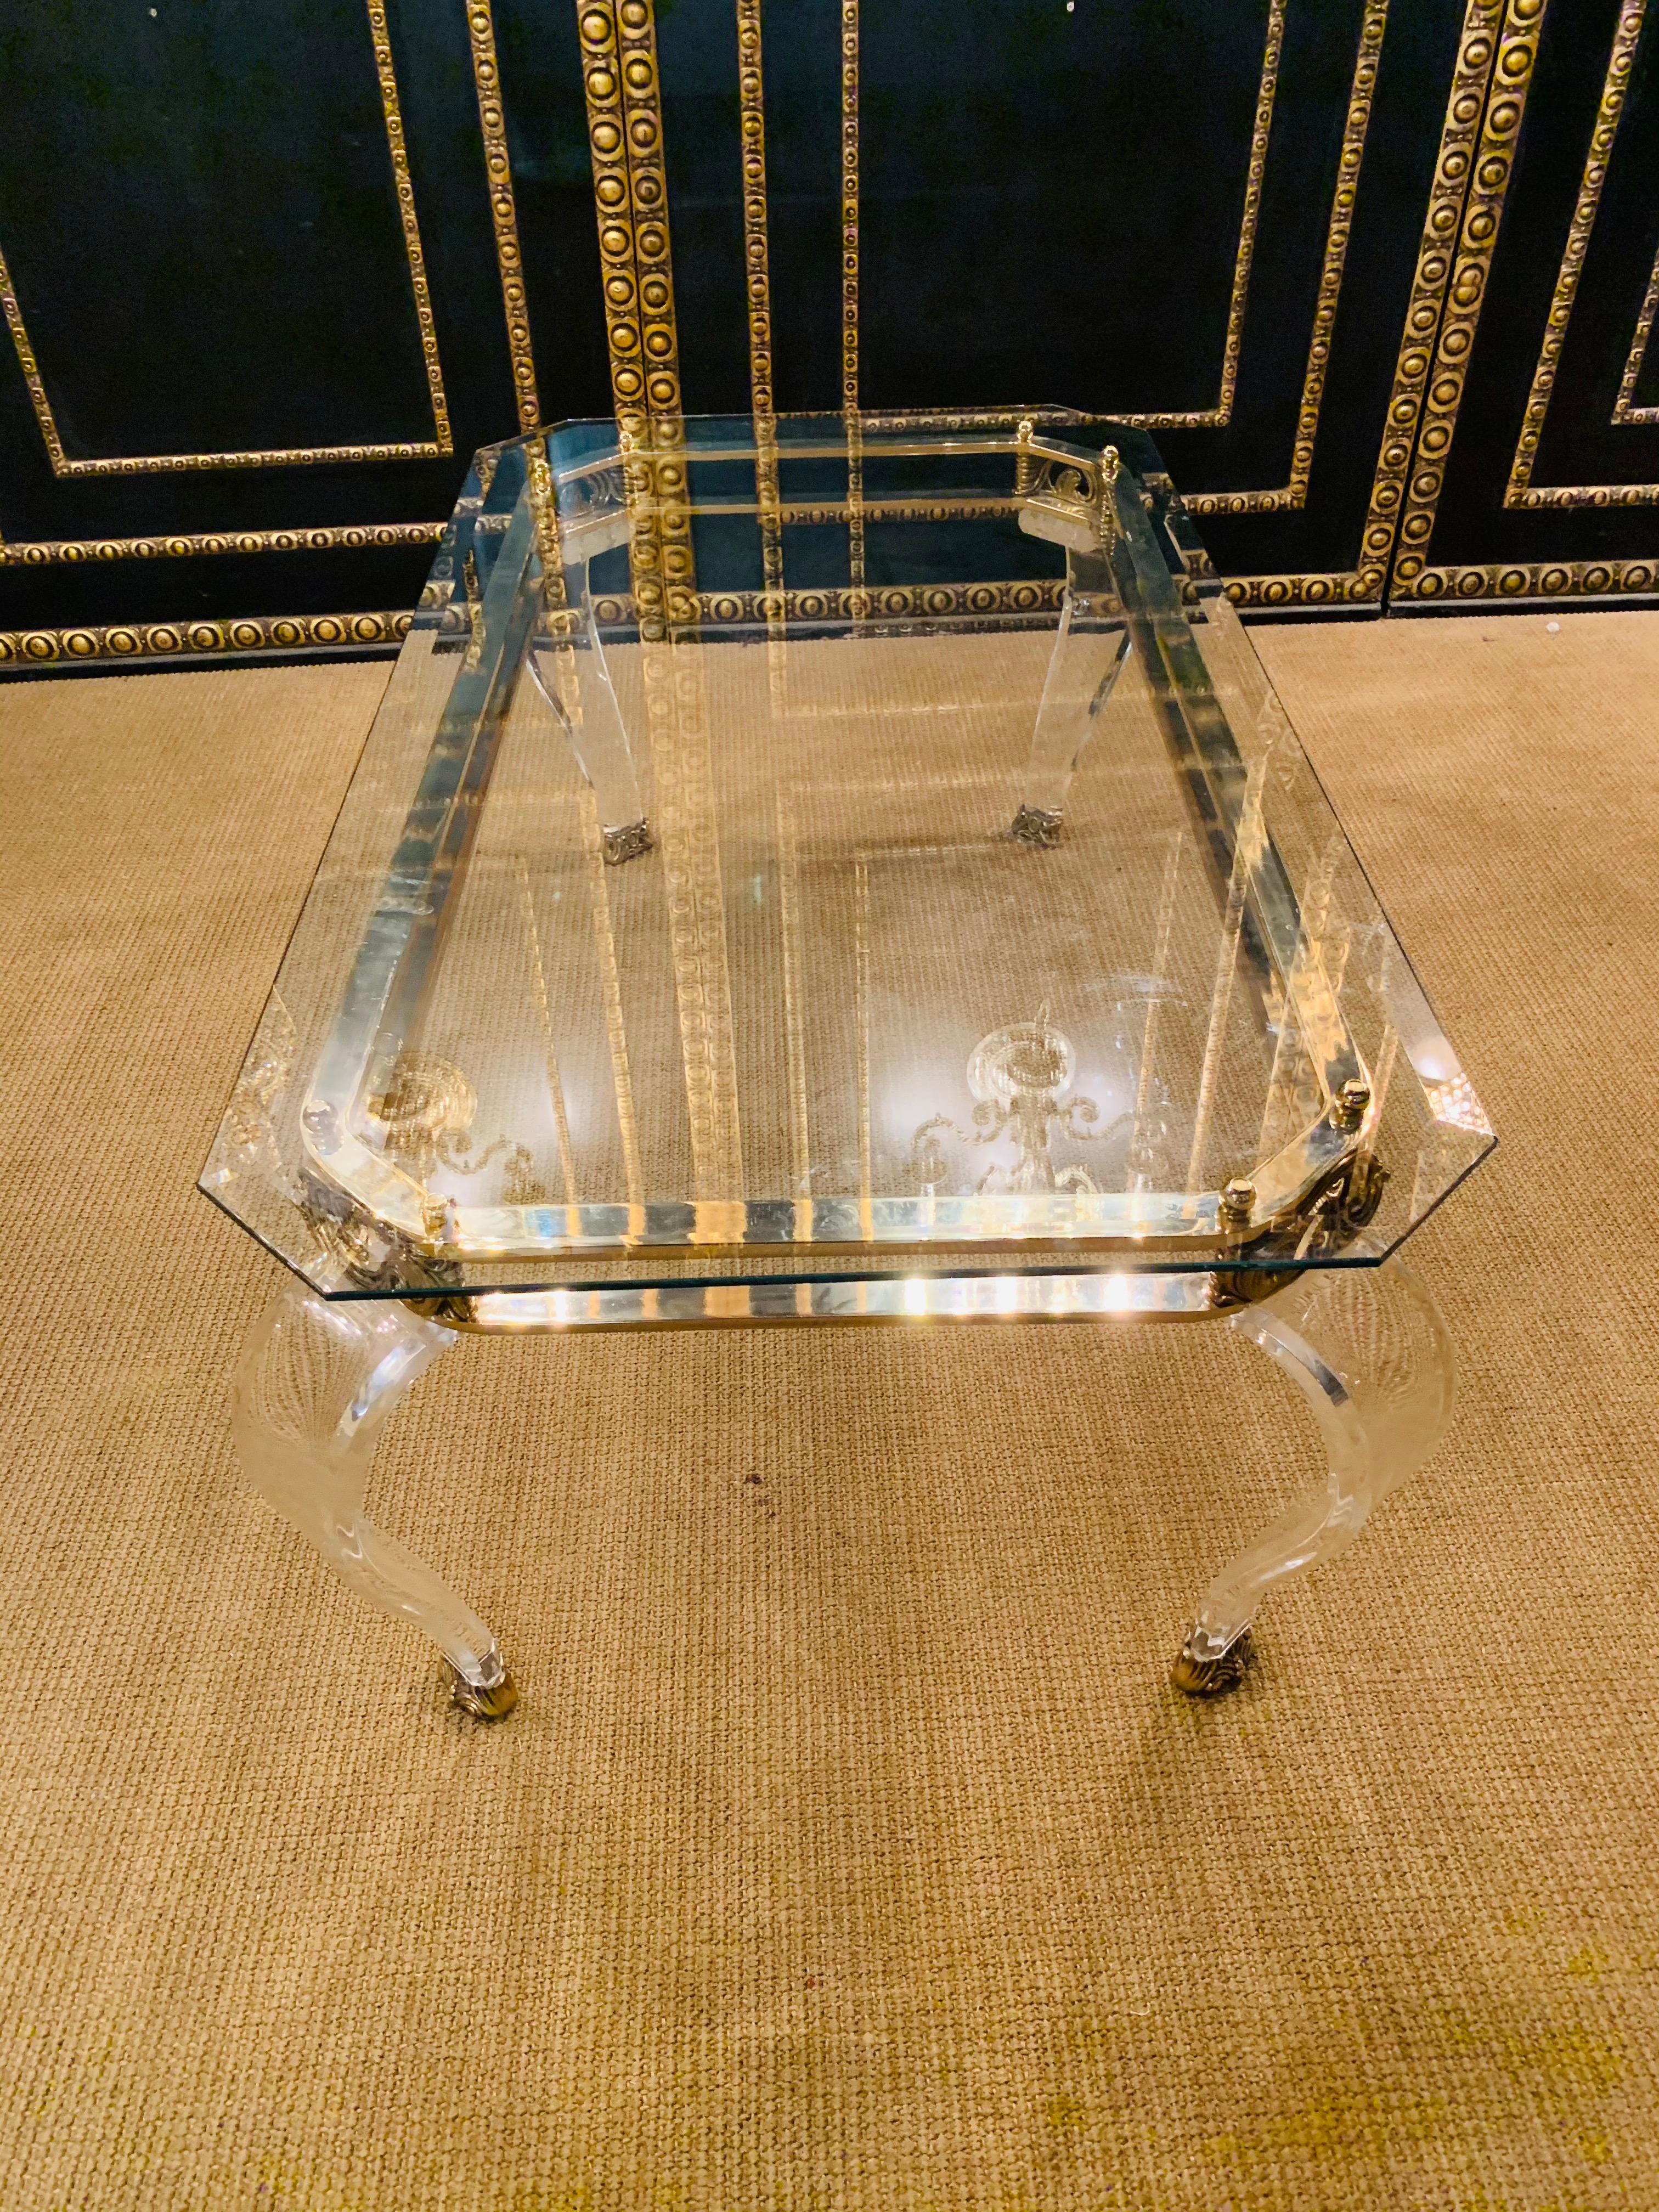 Luxury Table Acrylic with Brass Curved Legs in Acrylic High Quality 13